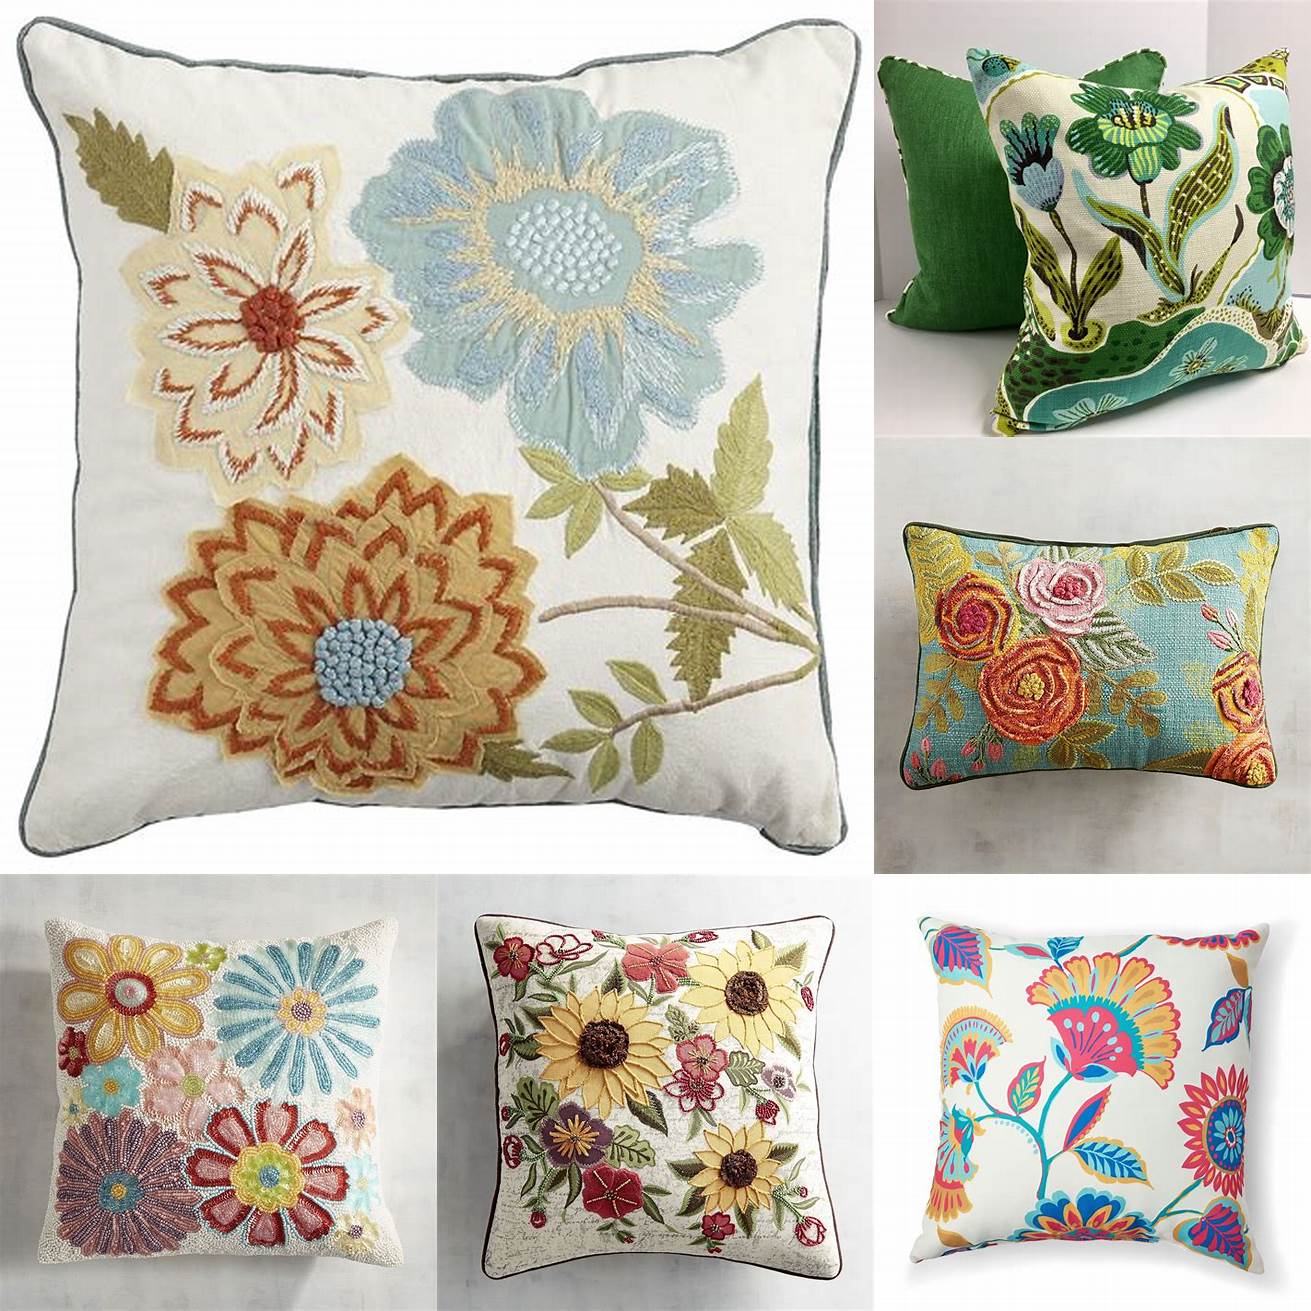 Flower Patterned Pillows